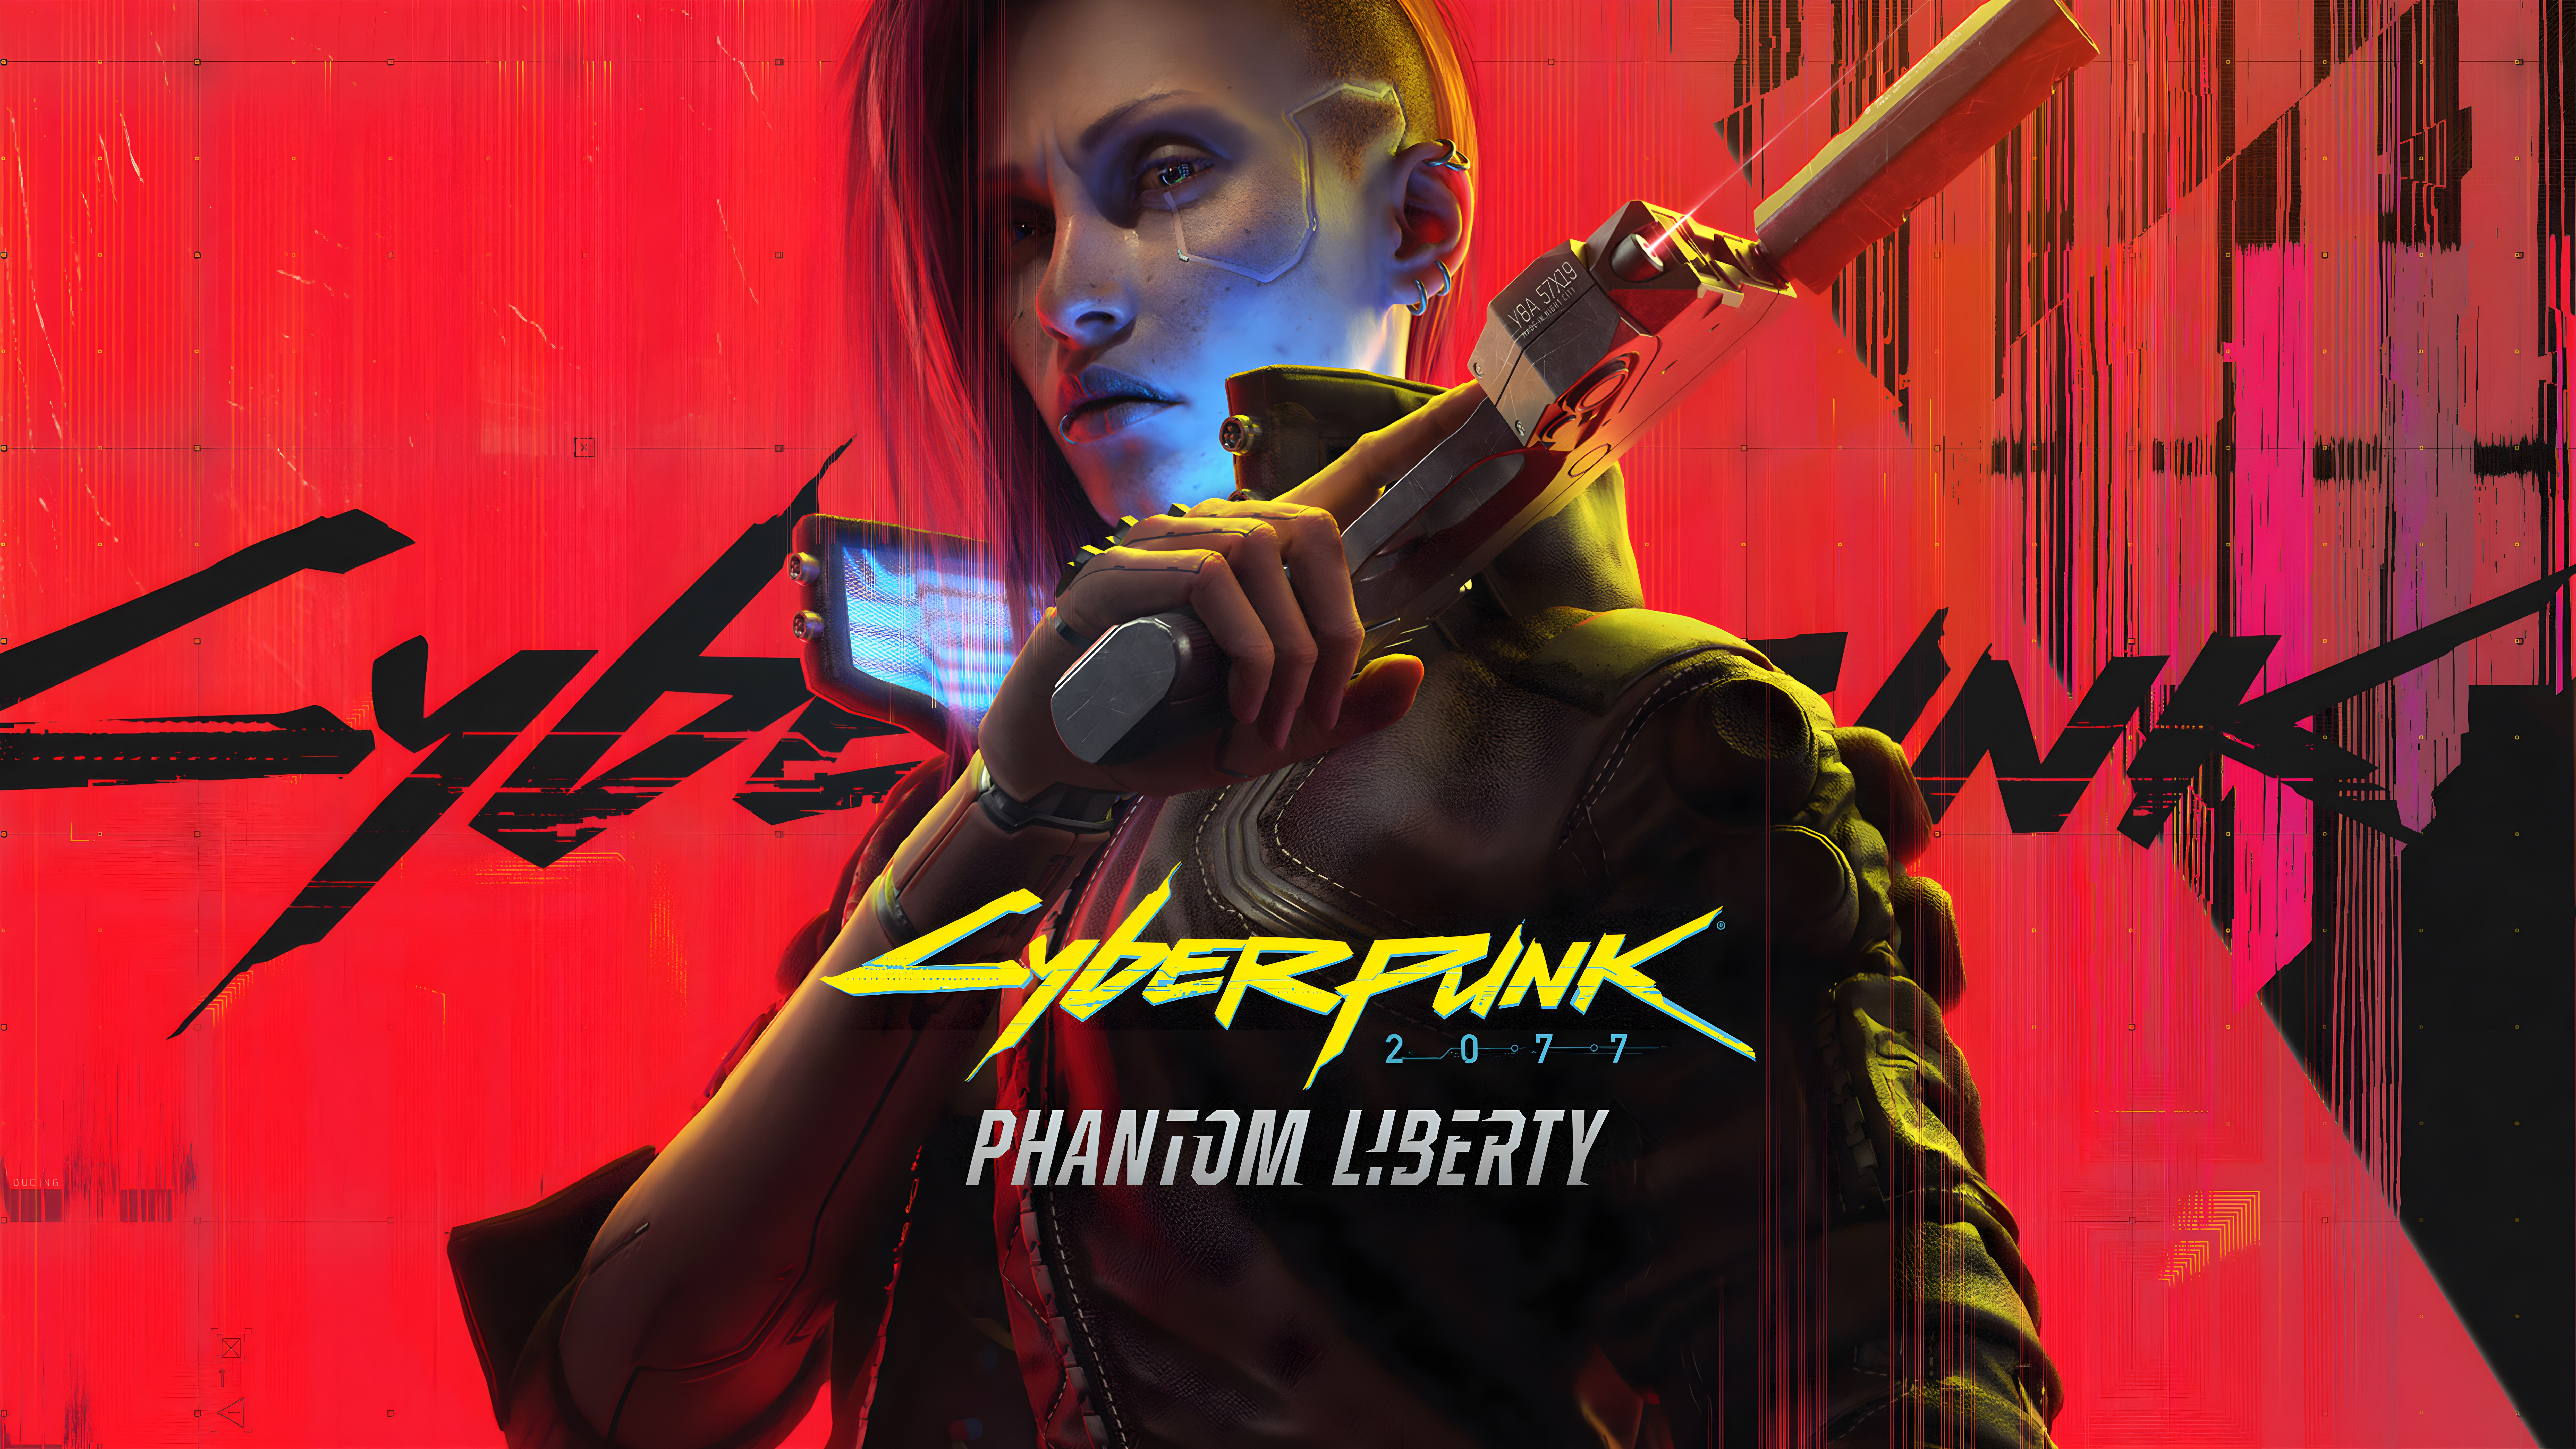 Cyberpunk Cyberpunk 2077 Cyberpunk 2077 Phantom Liberty CD Projekt RED Games Posters Weapon Gun Red  10240x5760